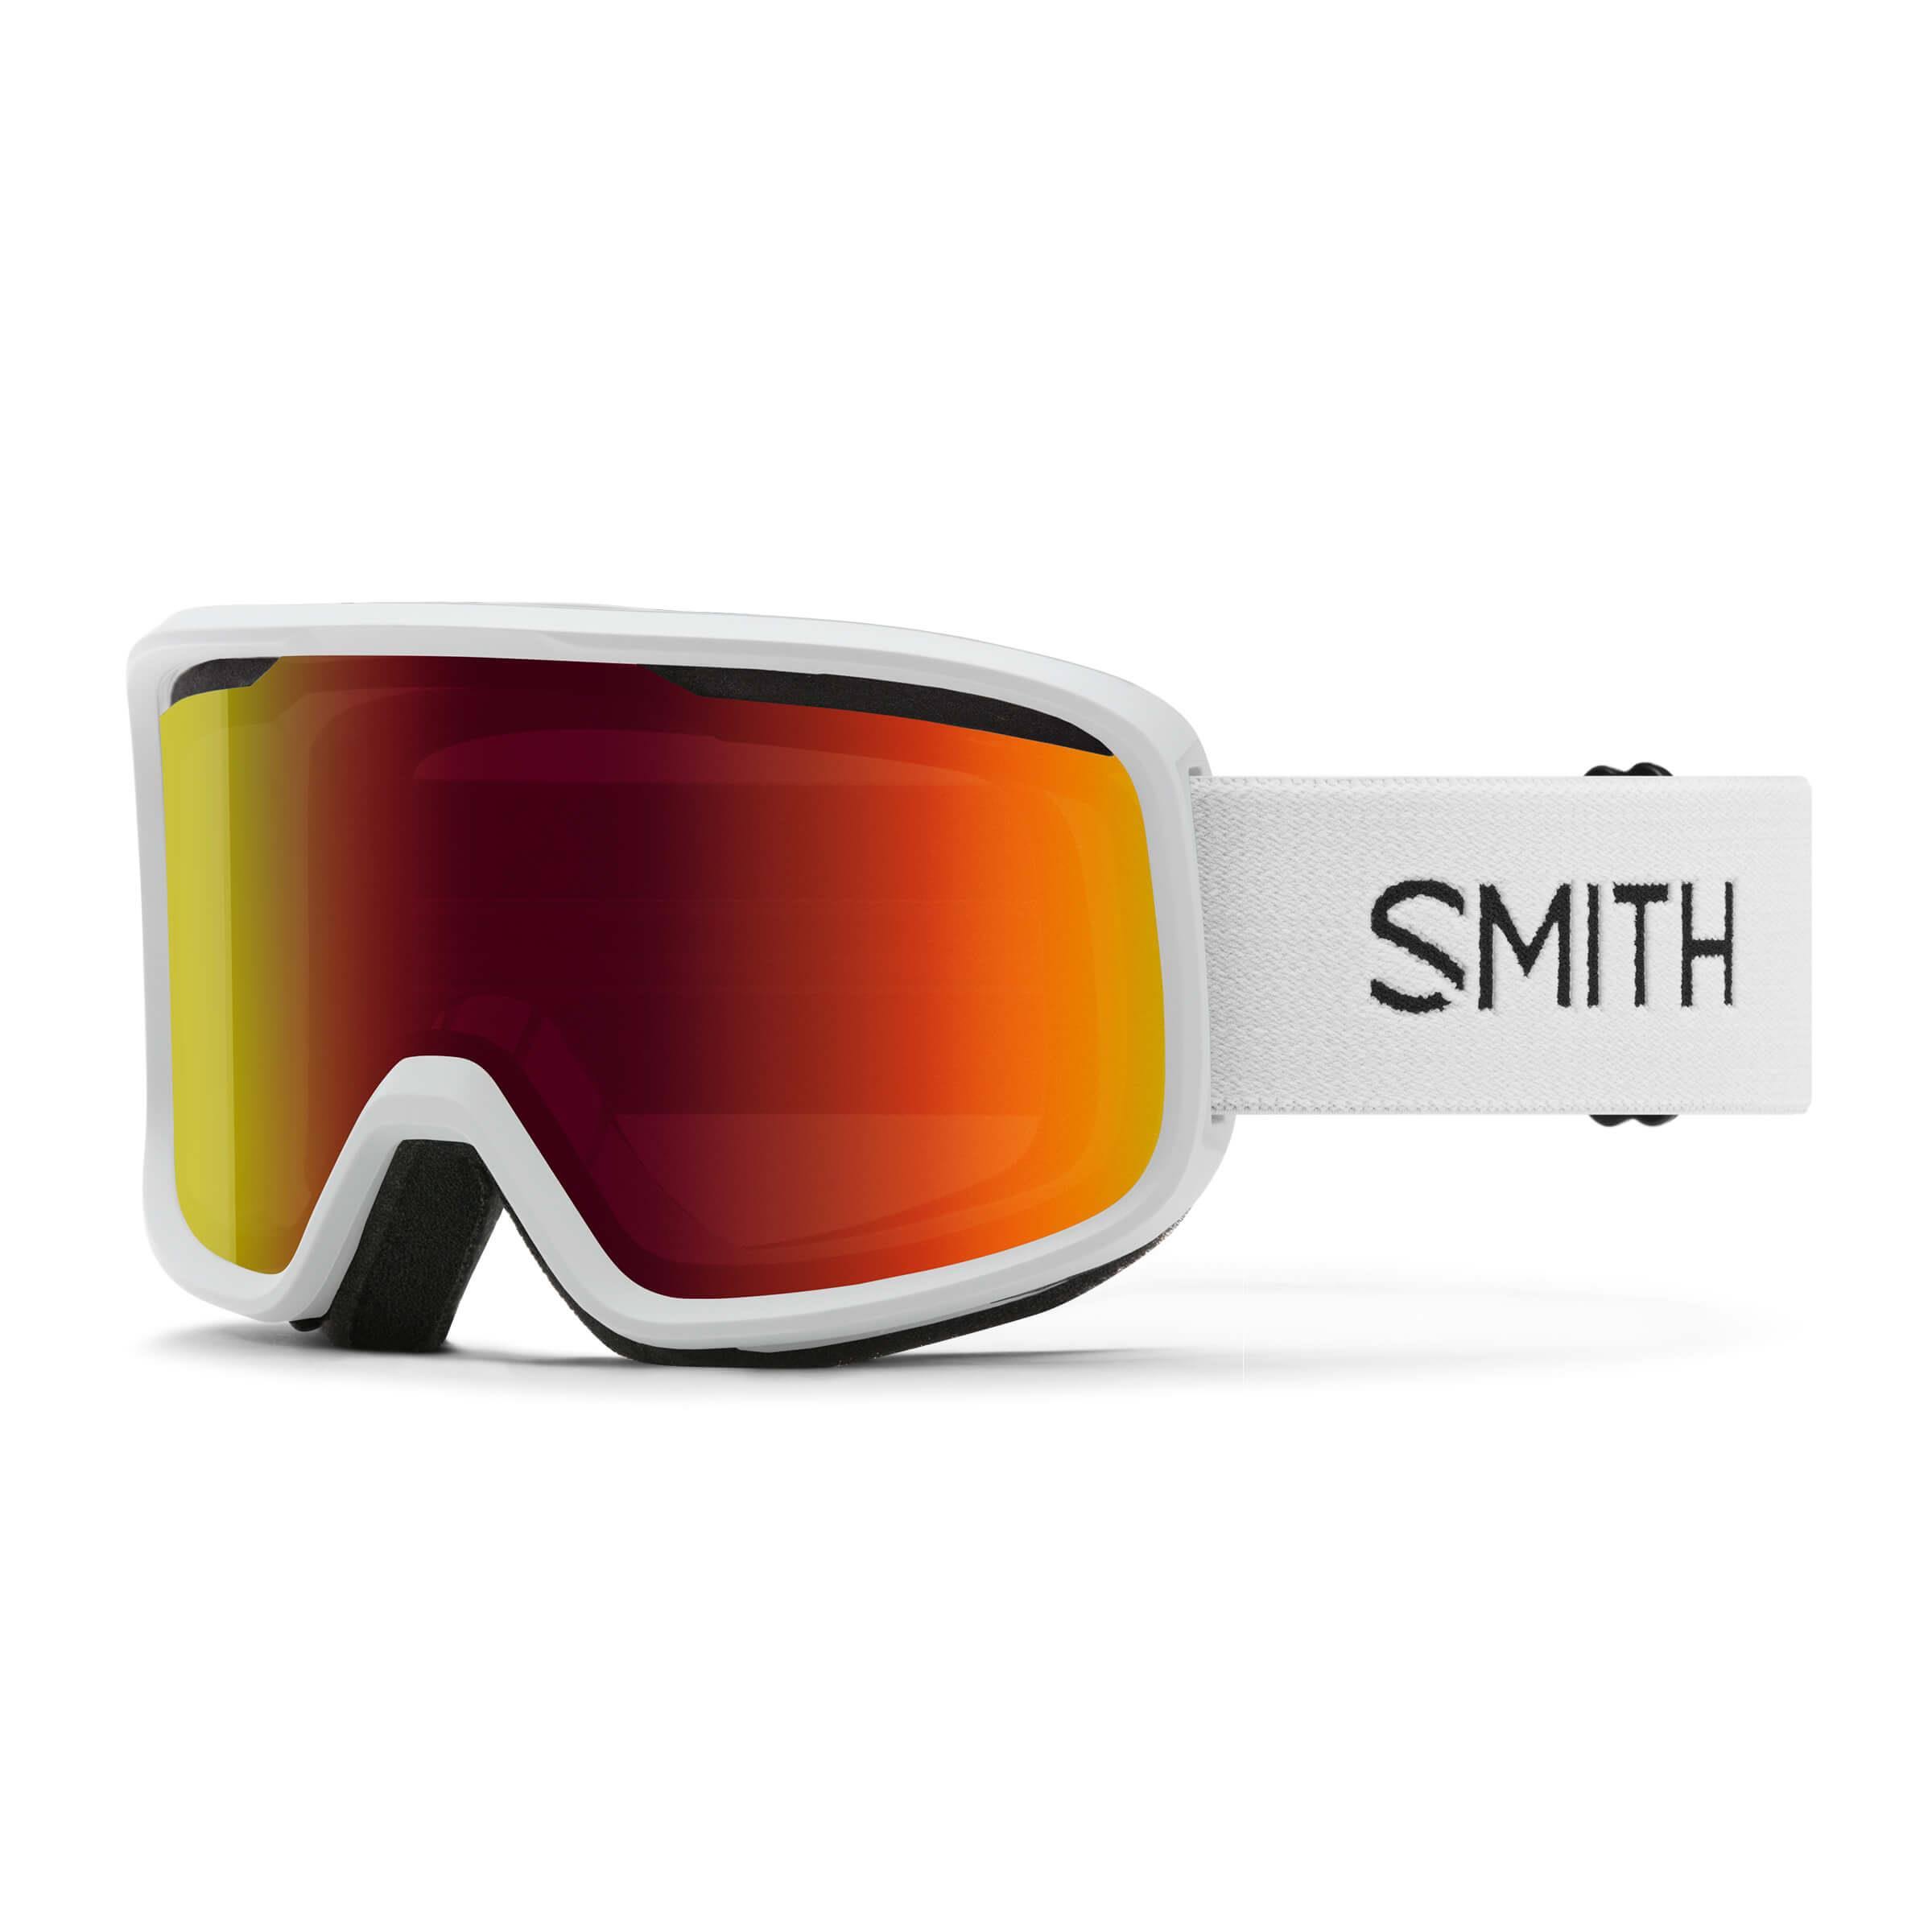 Smith Frontier Goggles White Red Sol-X Mirror M0042933299C1